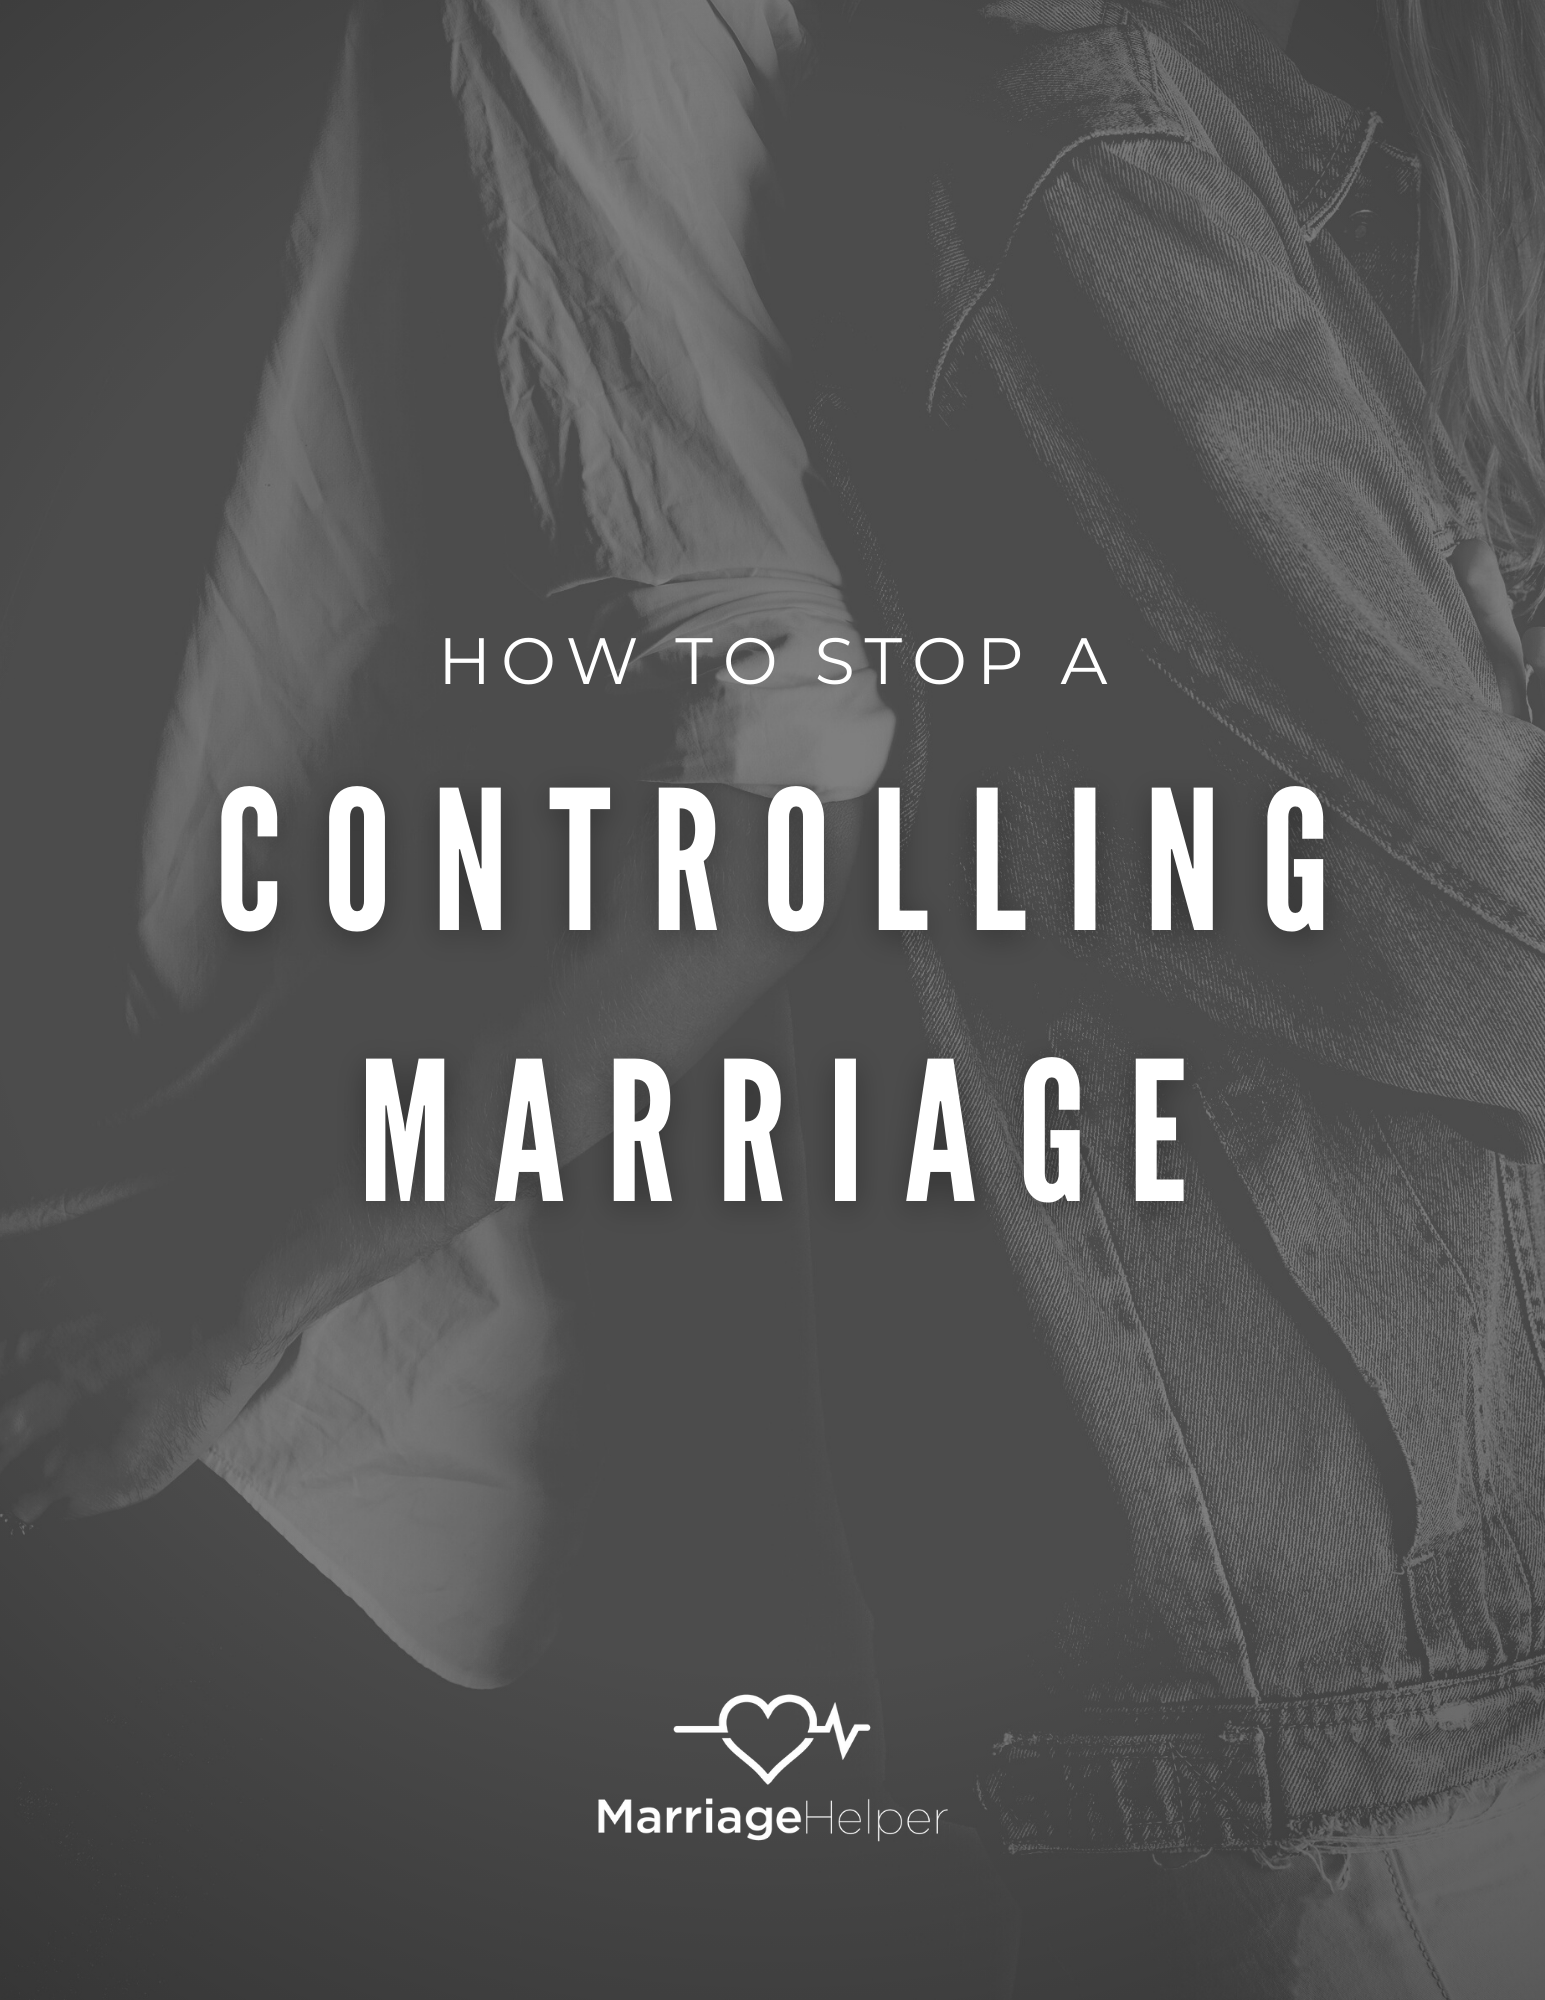 How to Stop a Controlling Marriage eBook (Updated)